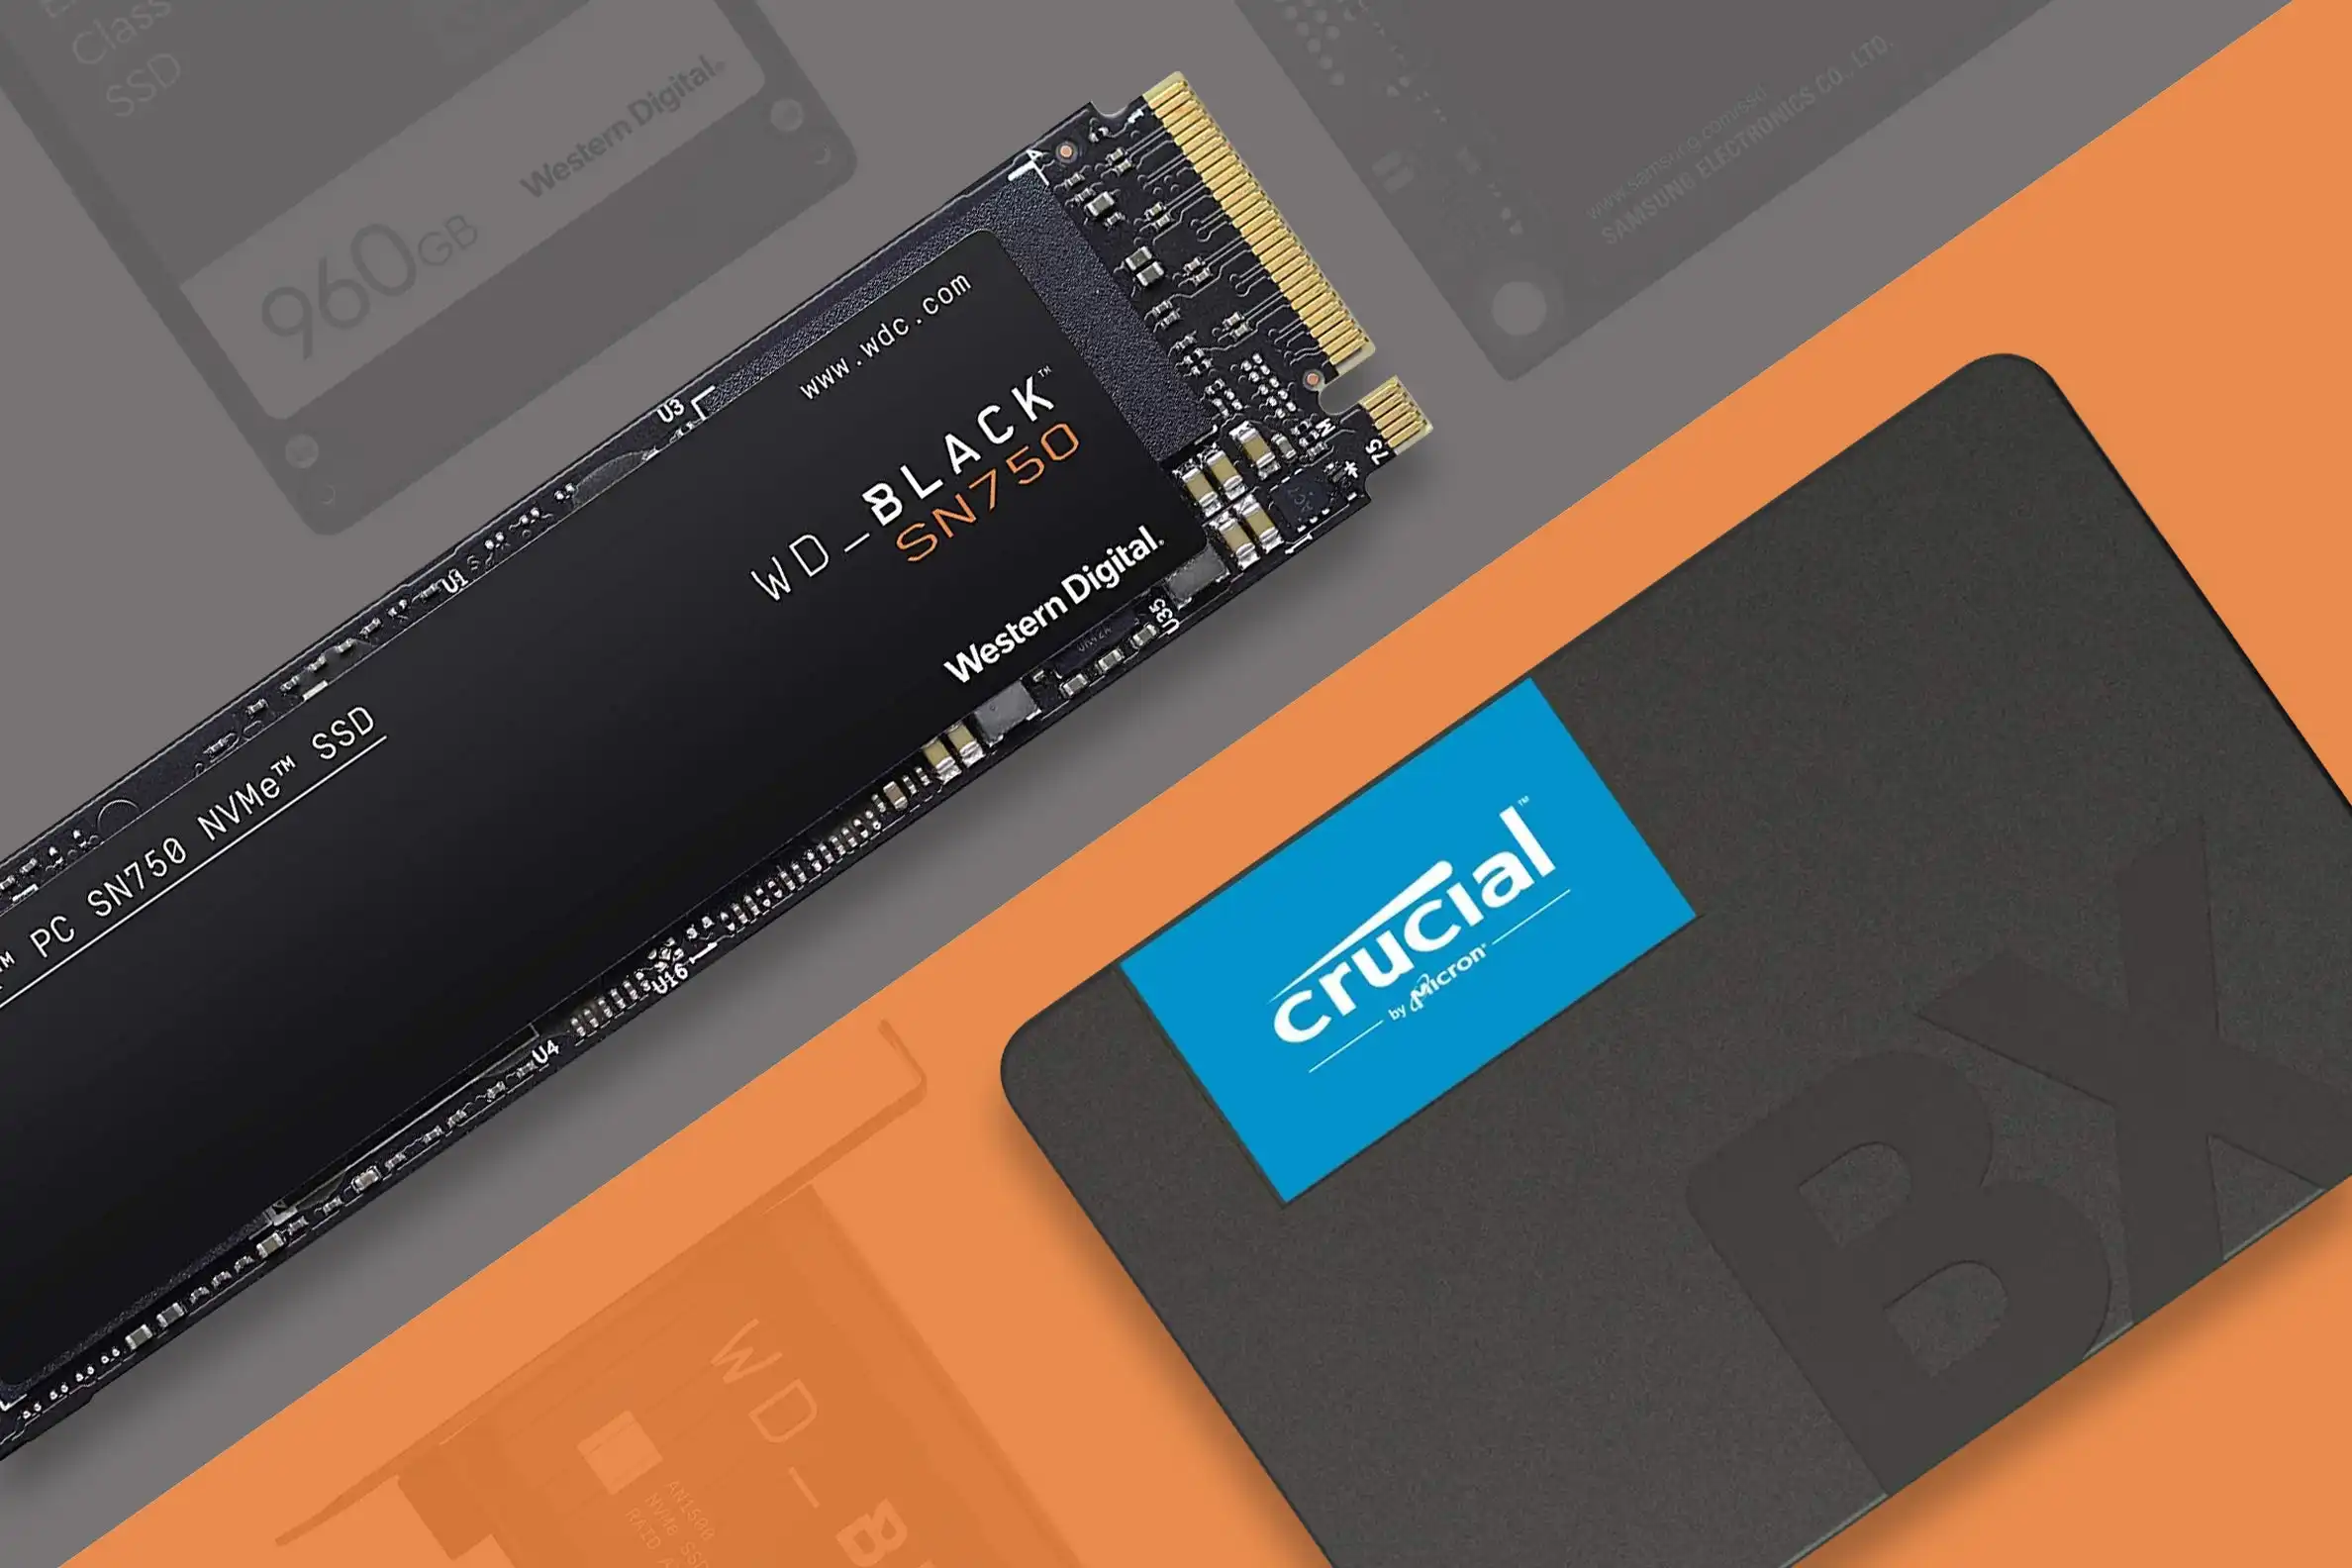 How To Choose An SSD